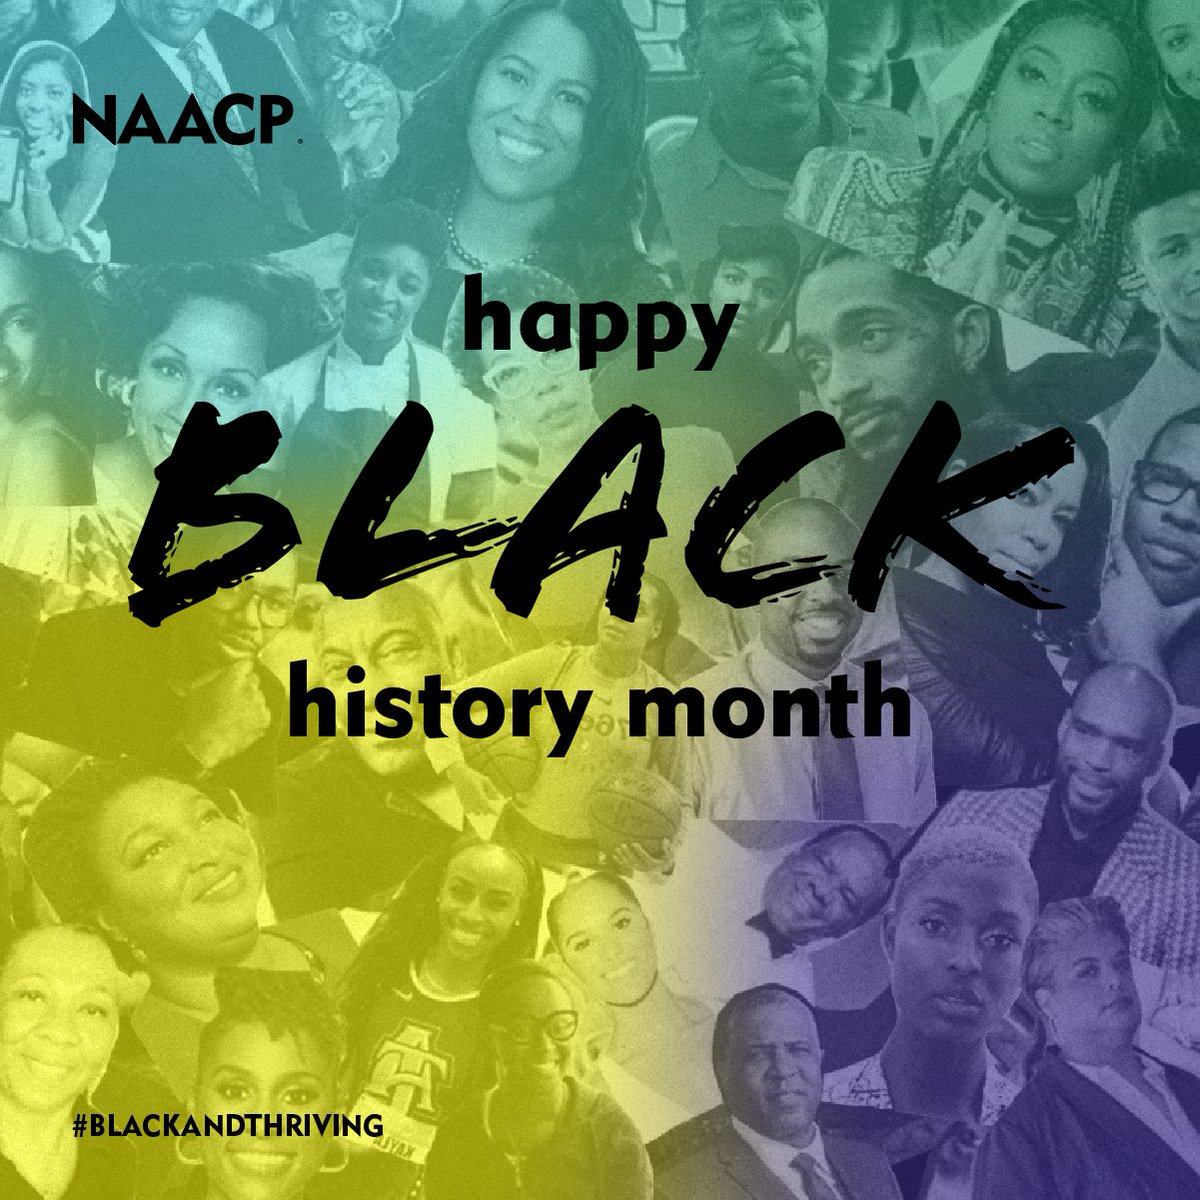 We're kicking off #BlackHistoryMonth doing what we do best: honoring our ancestors with action, fighting for Black lives, and amplifying Black excellence. #BlackandThriving